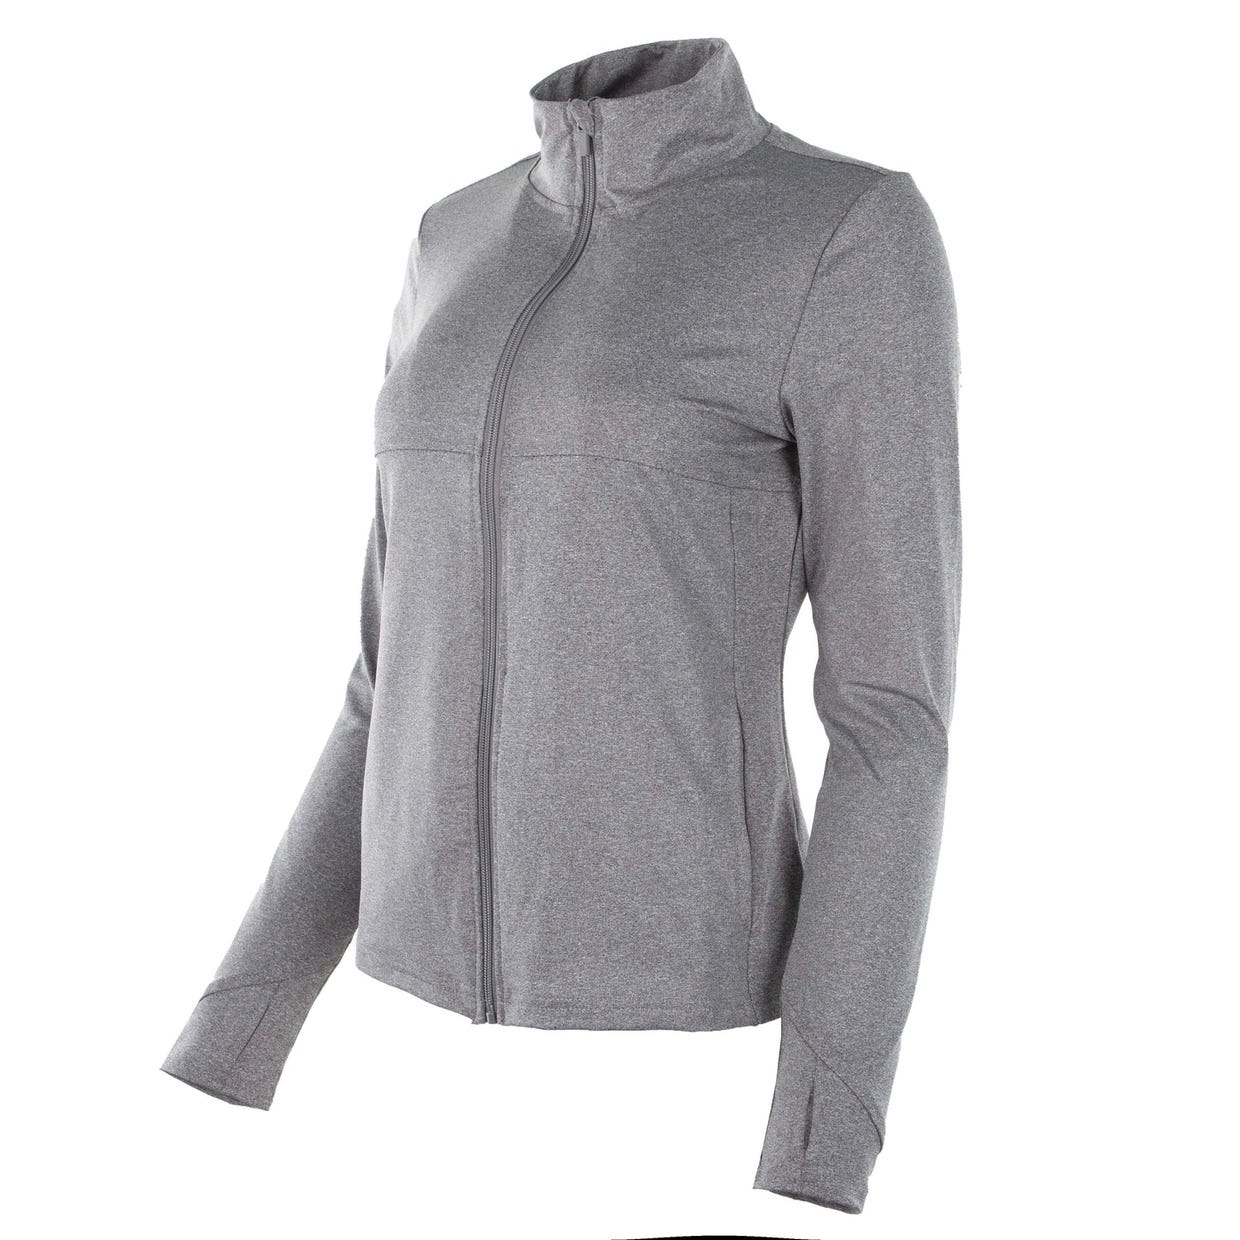 A heather gray full-zip jacket featuring a raised collar, zippered front, and contoured seams on the torso and sleeves.